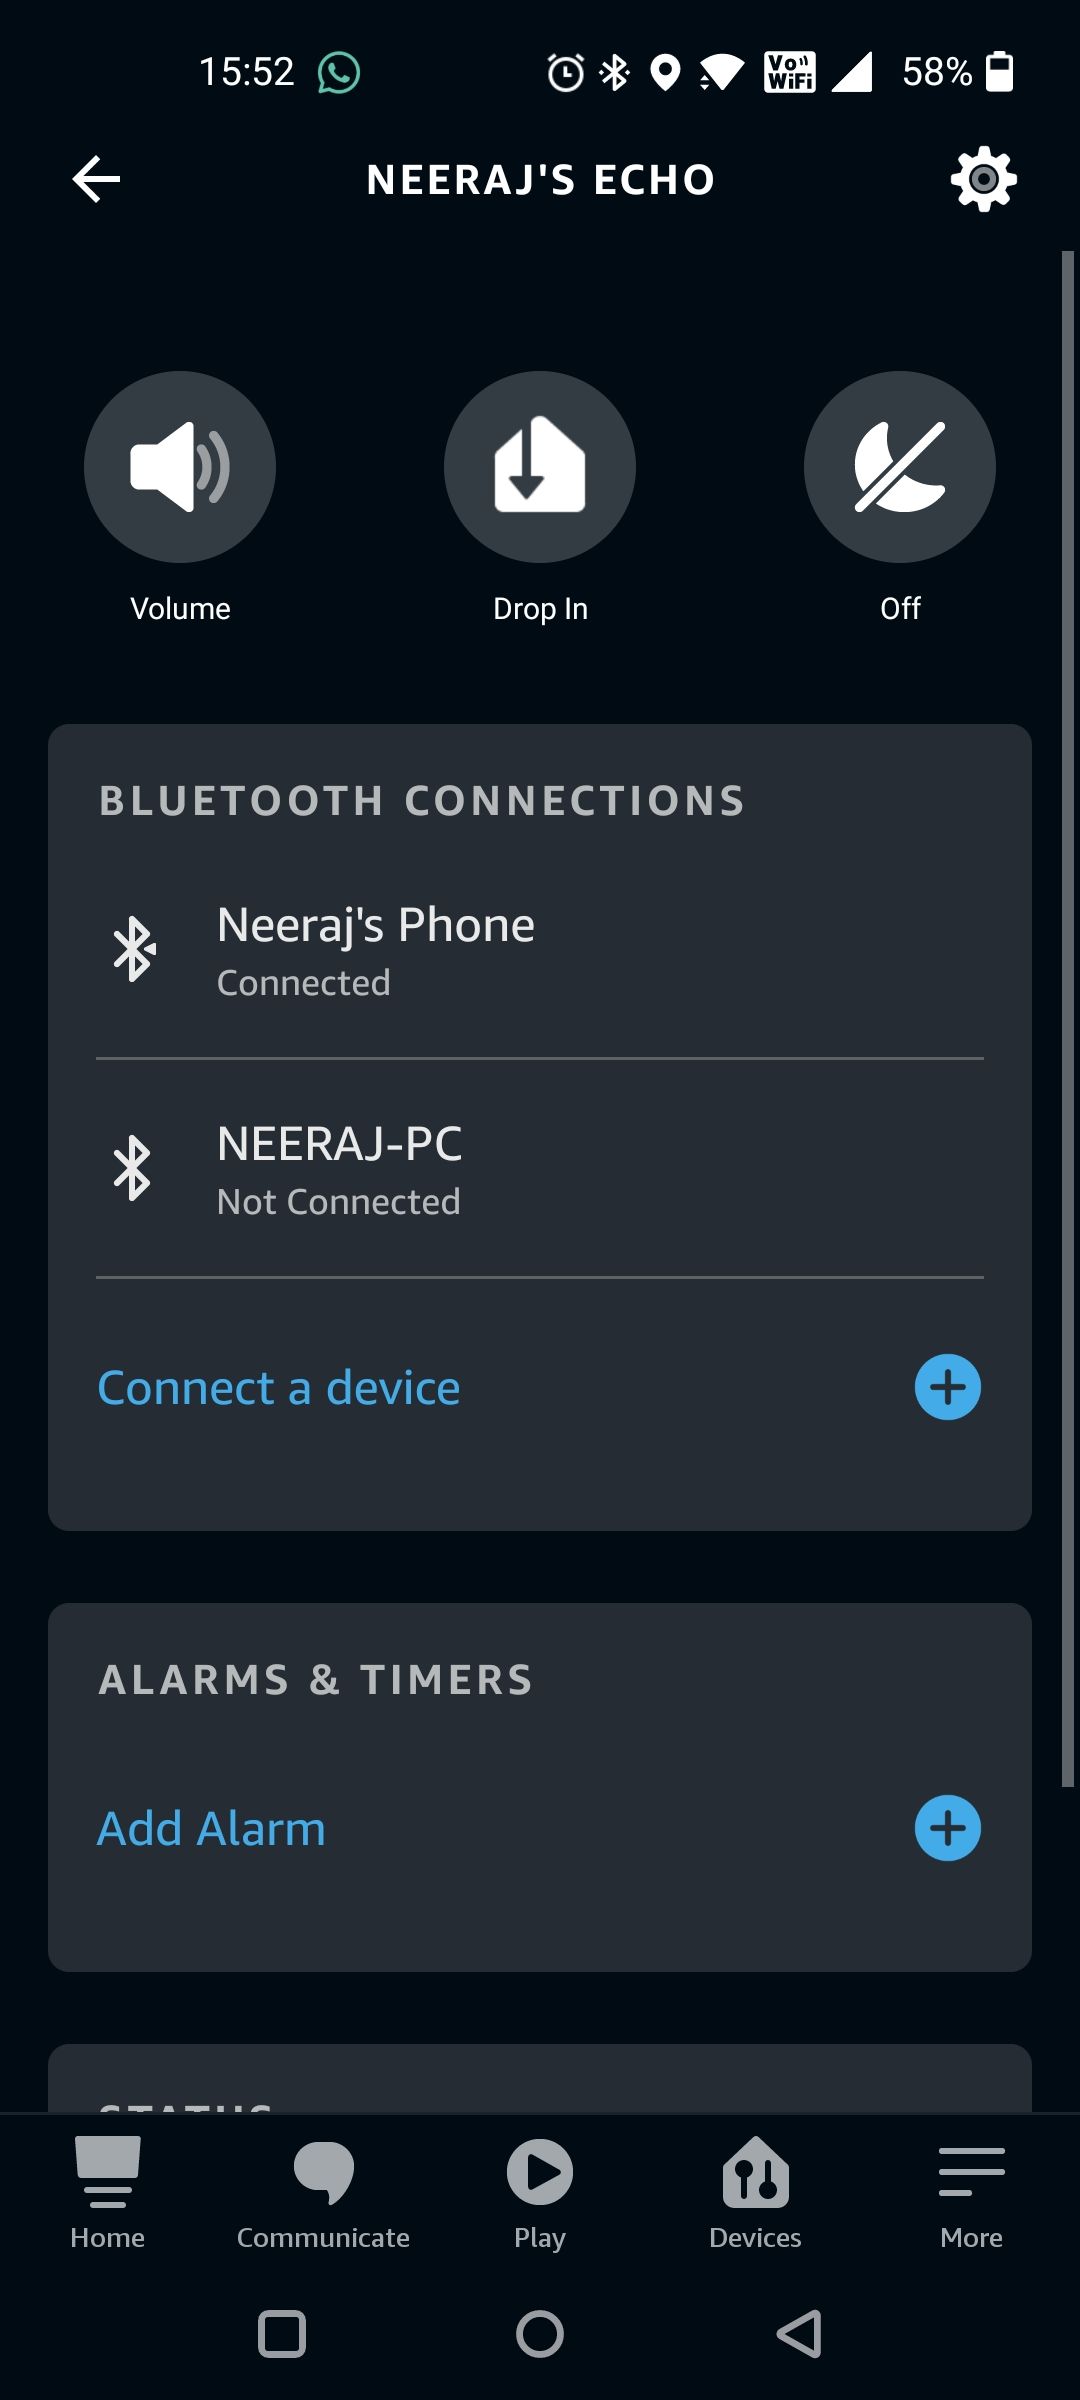 1. Connect a Device Under Bluetooth Connections